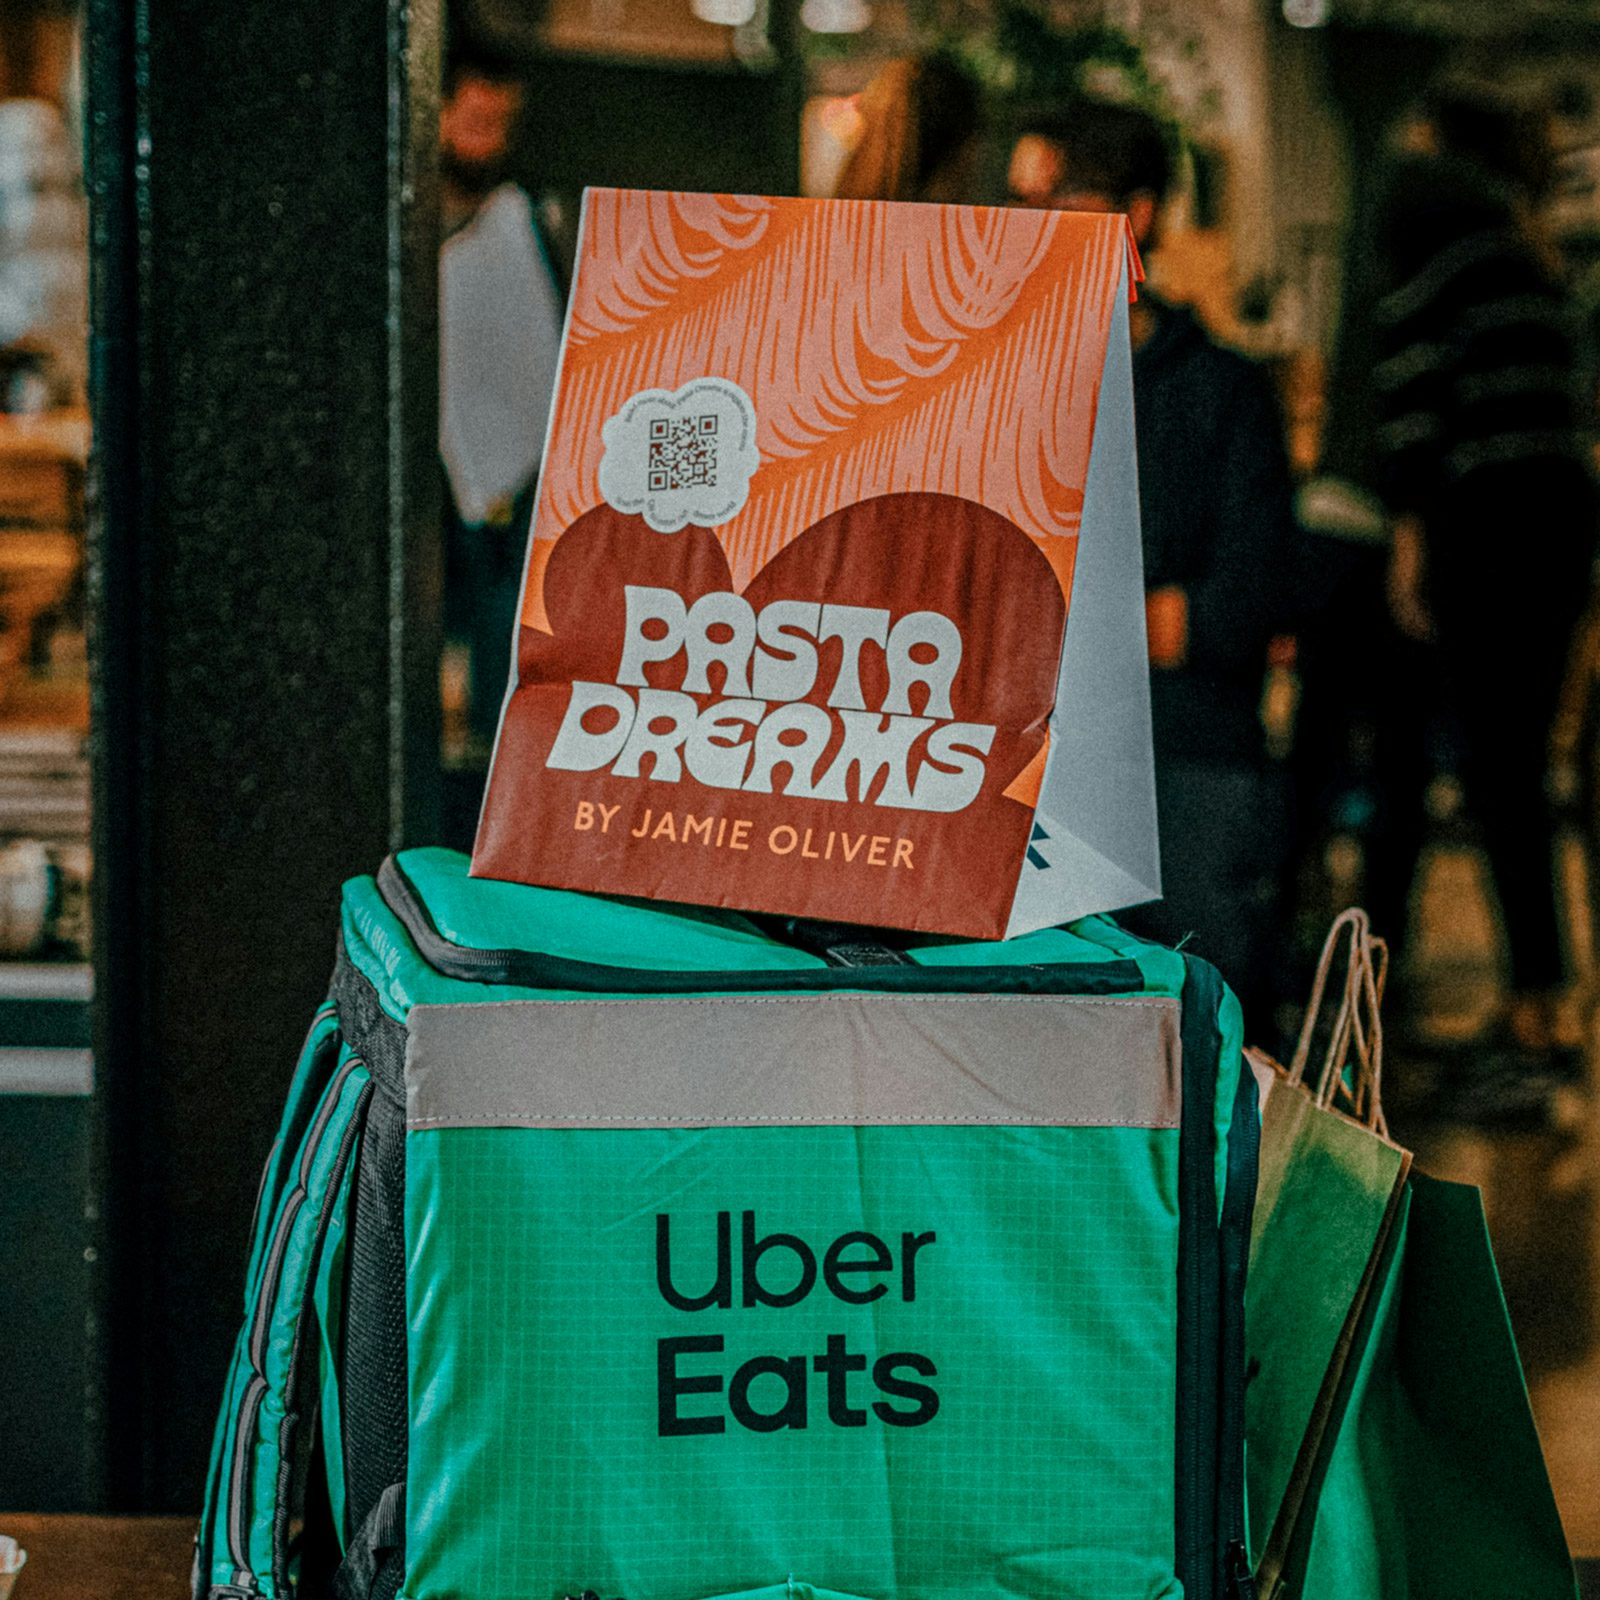 Image shows a paper bag that reads 'Pasta Dreams' on top of an Uber Eats delivery bag